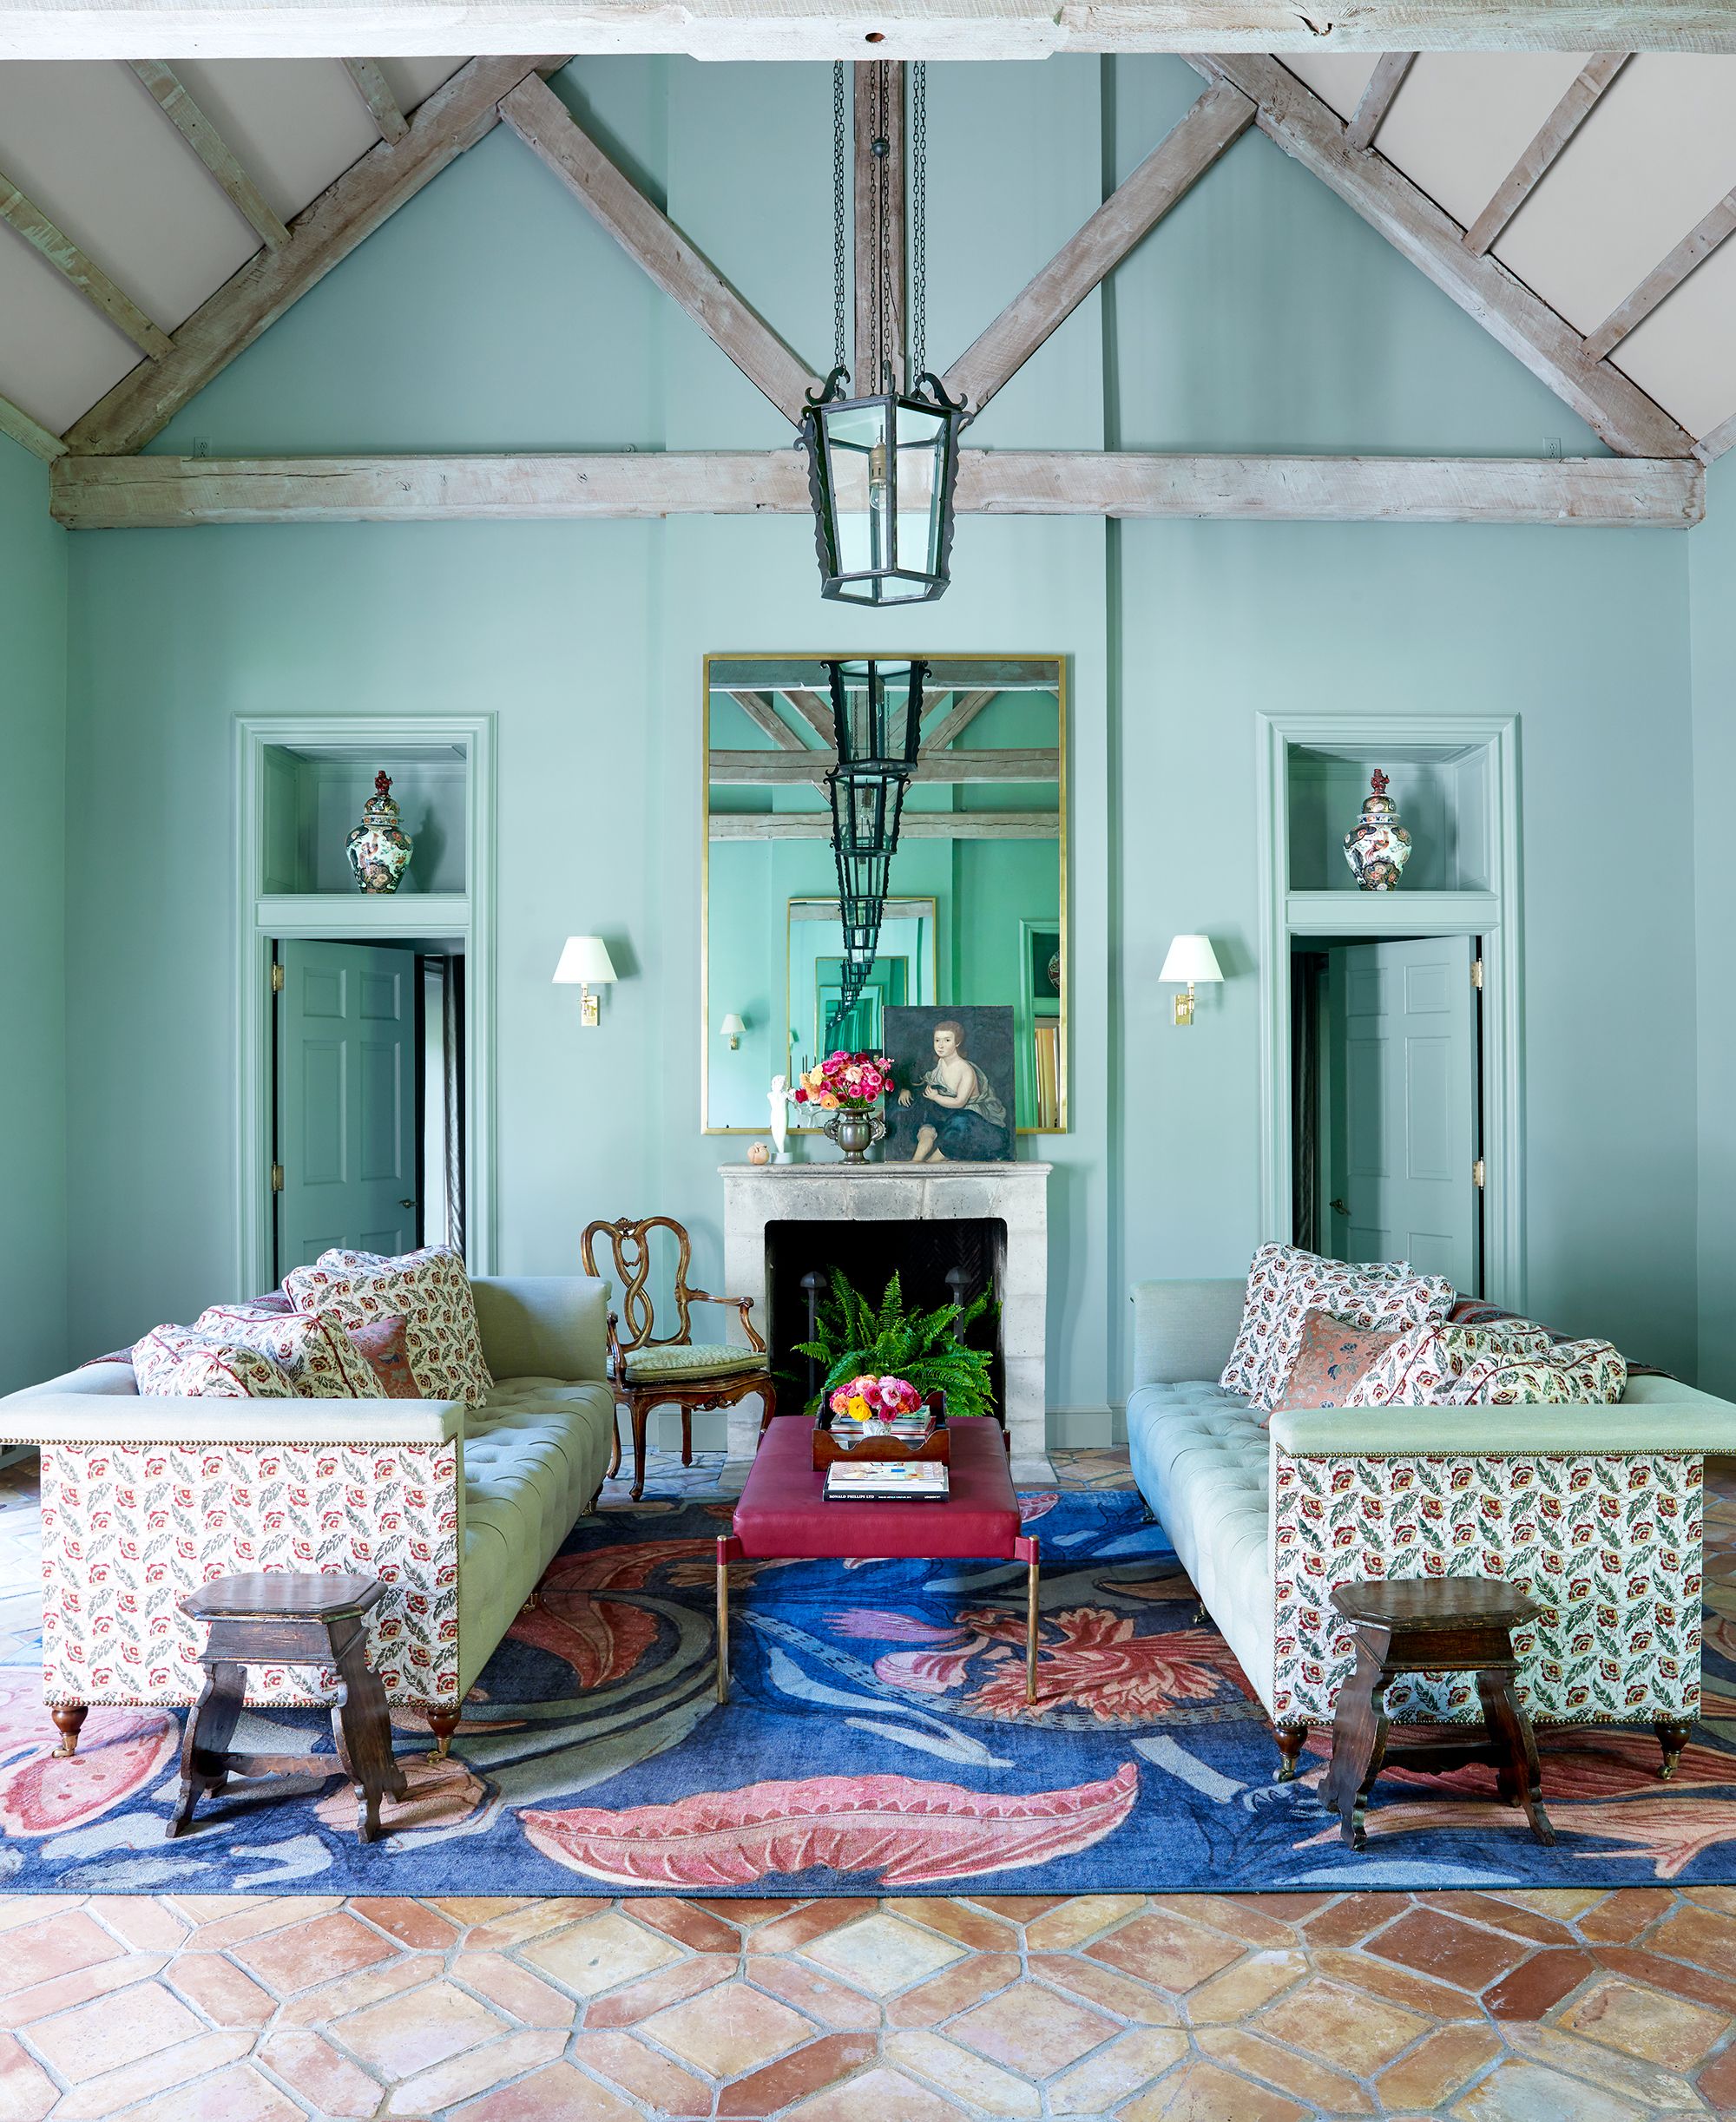 How to Decorate With Mint Green - 25 ...